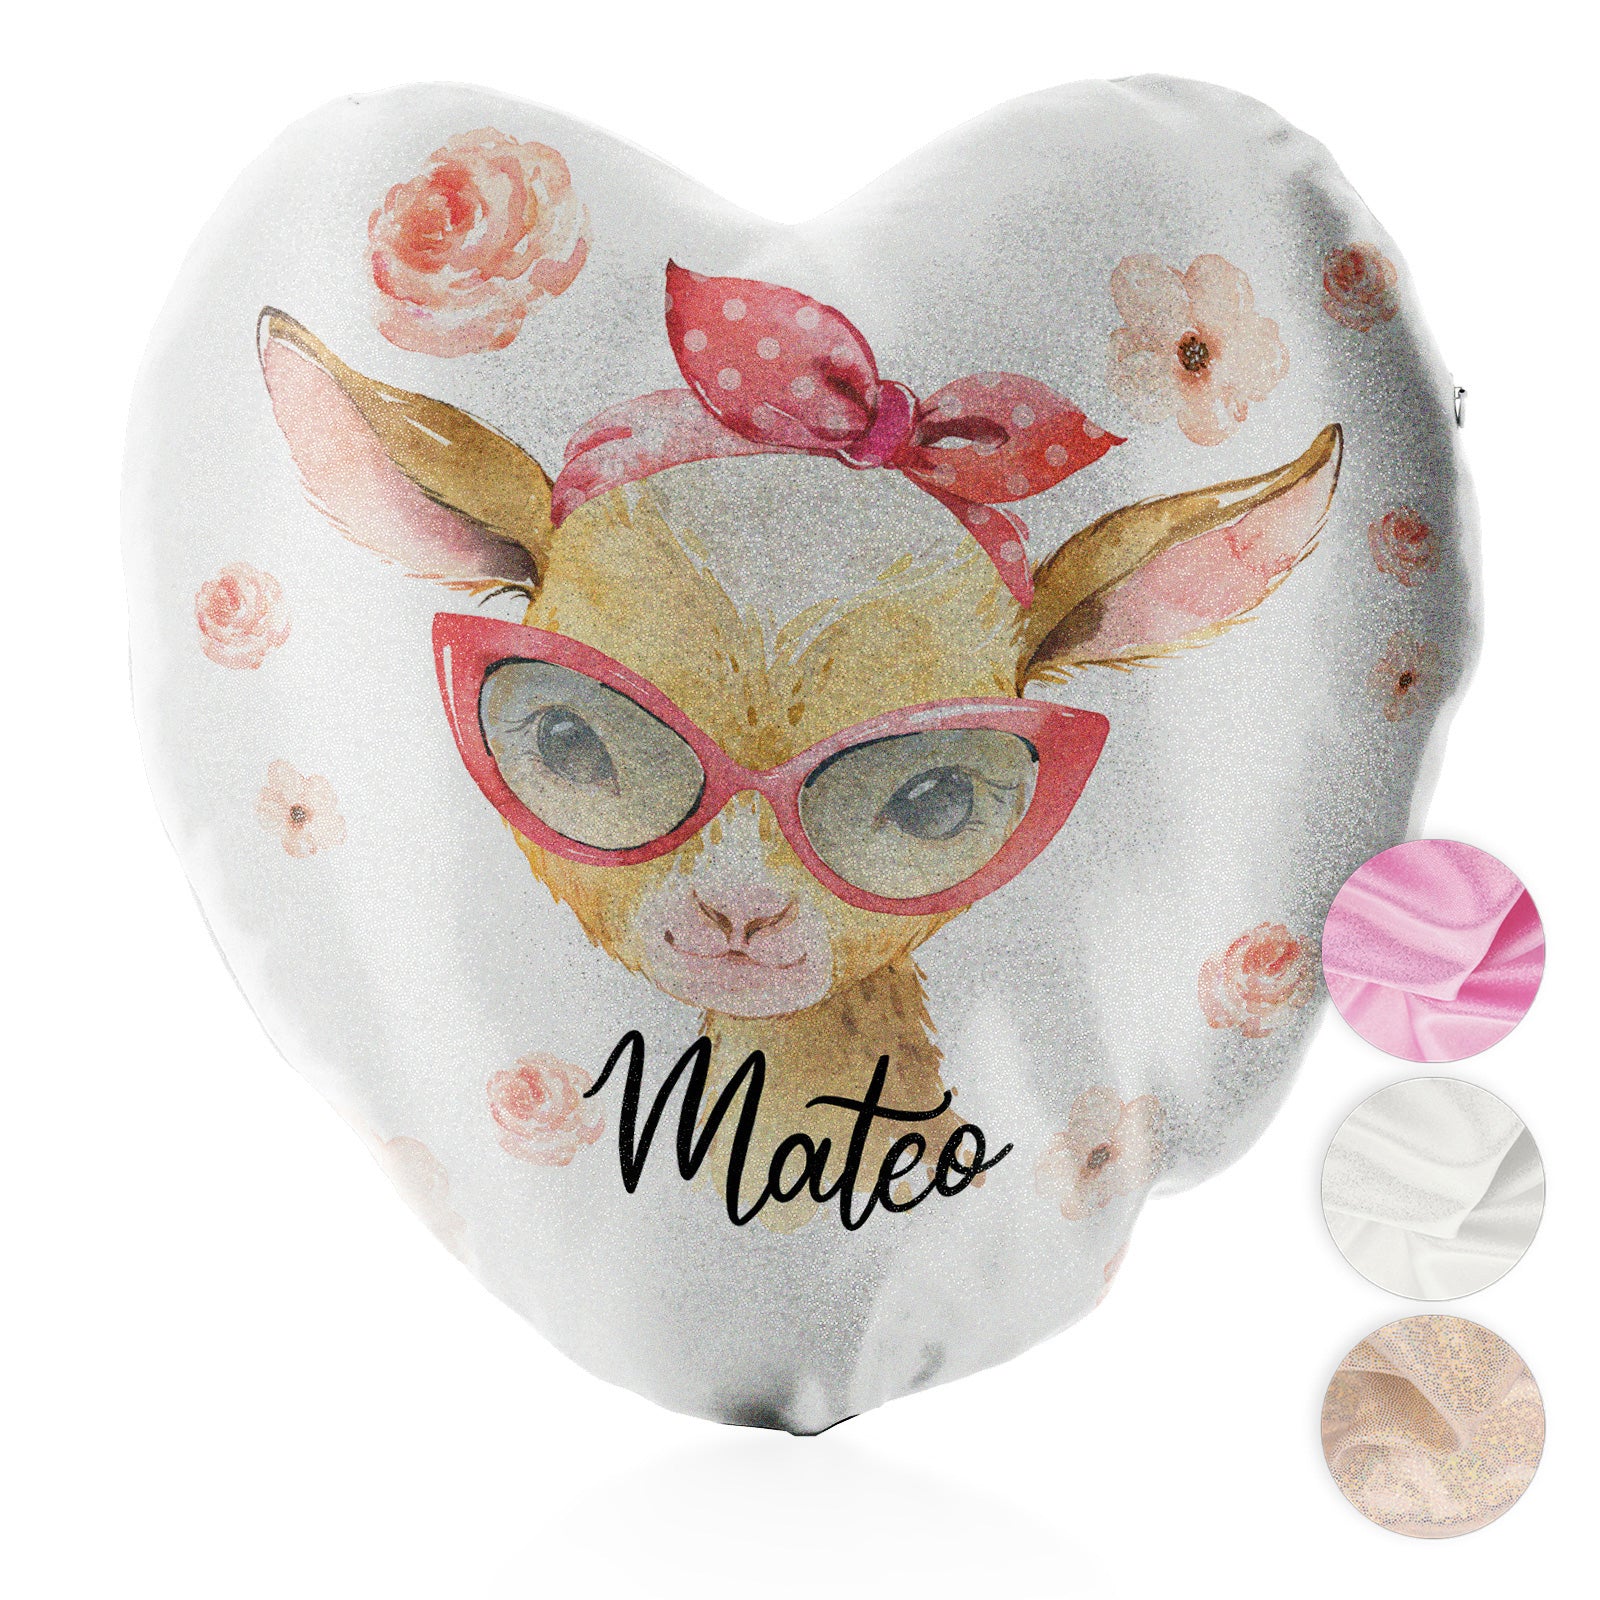 Personalised Glitter Heart Cushion with Goat Pink Glasses and Roses and Cute Text